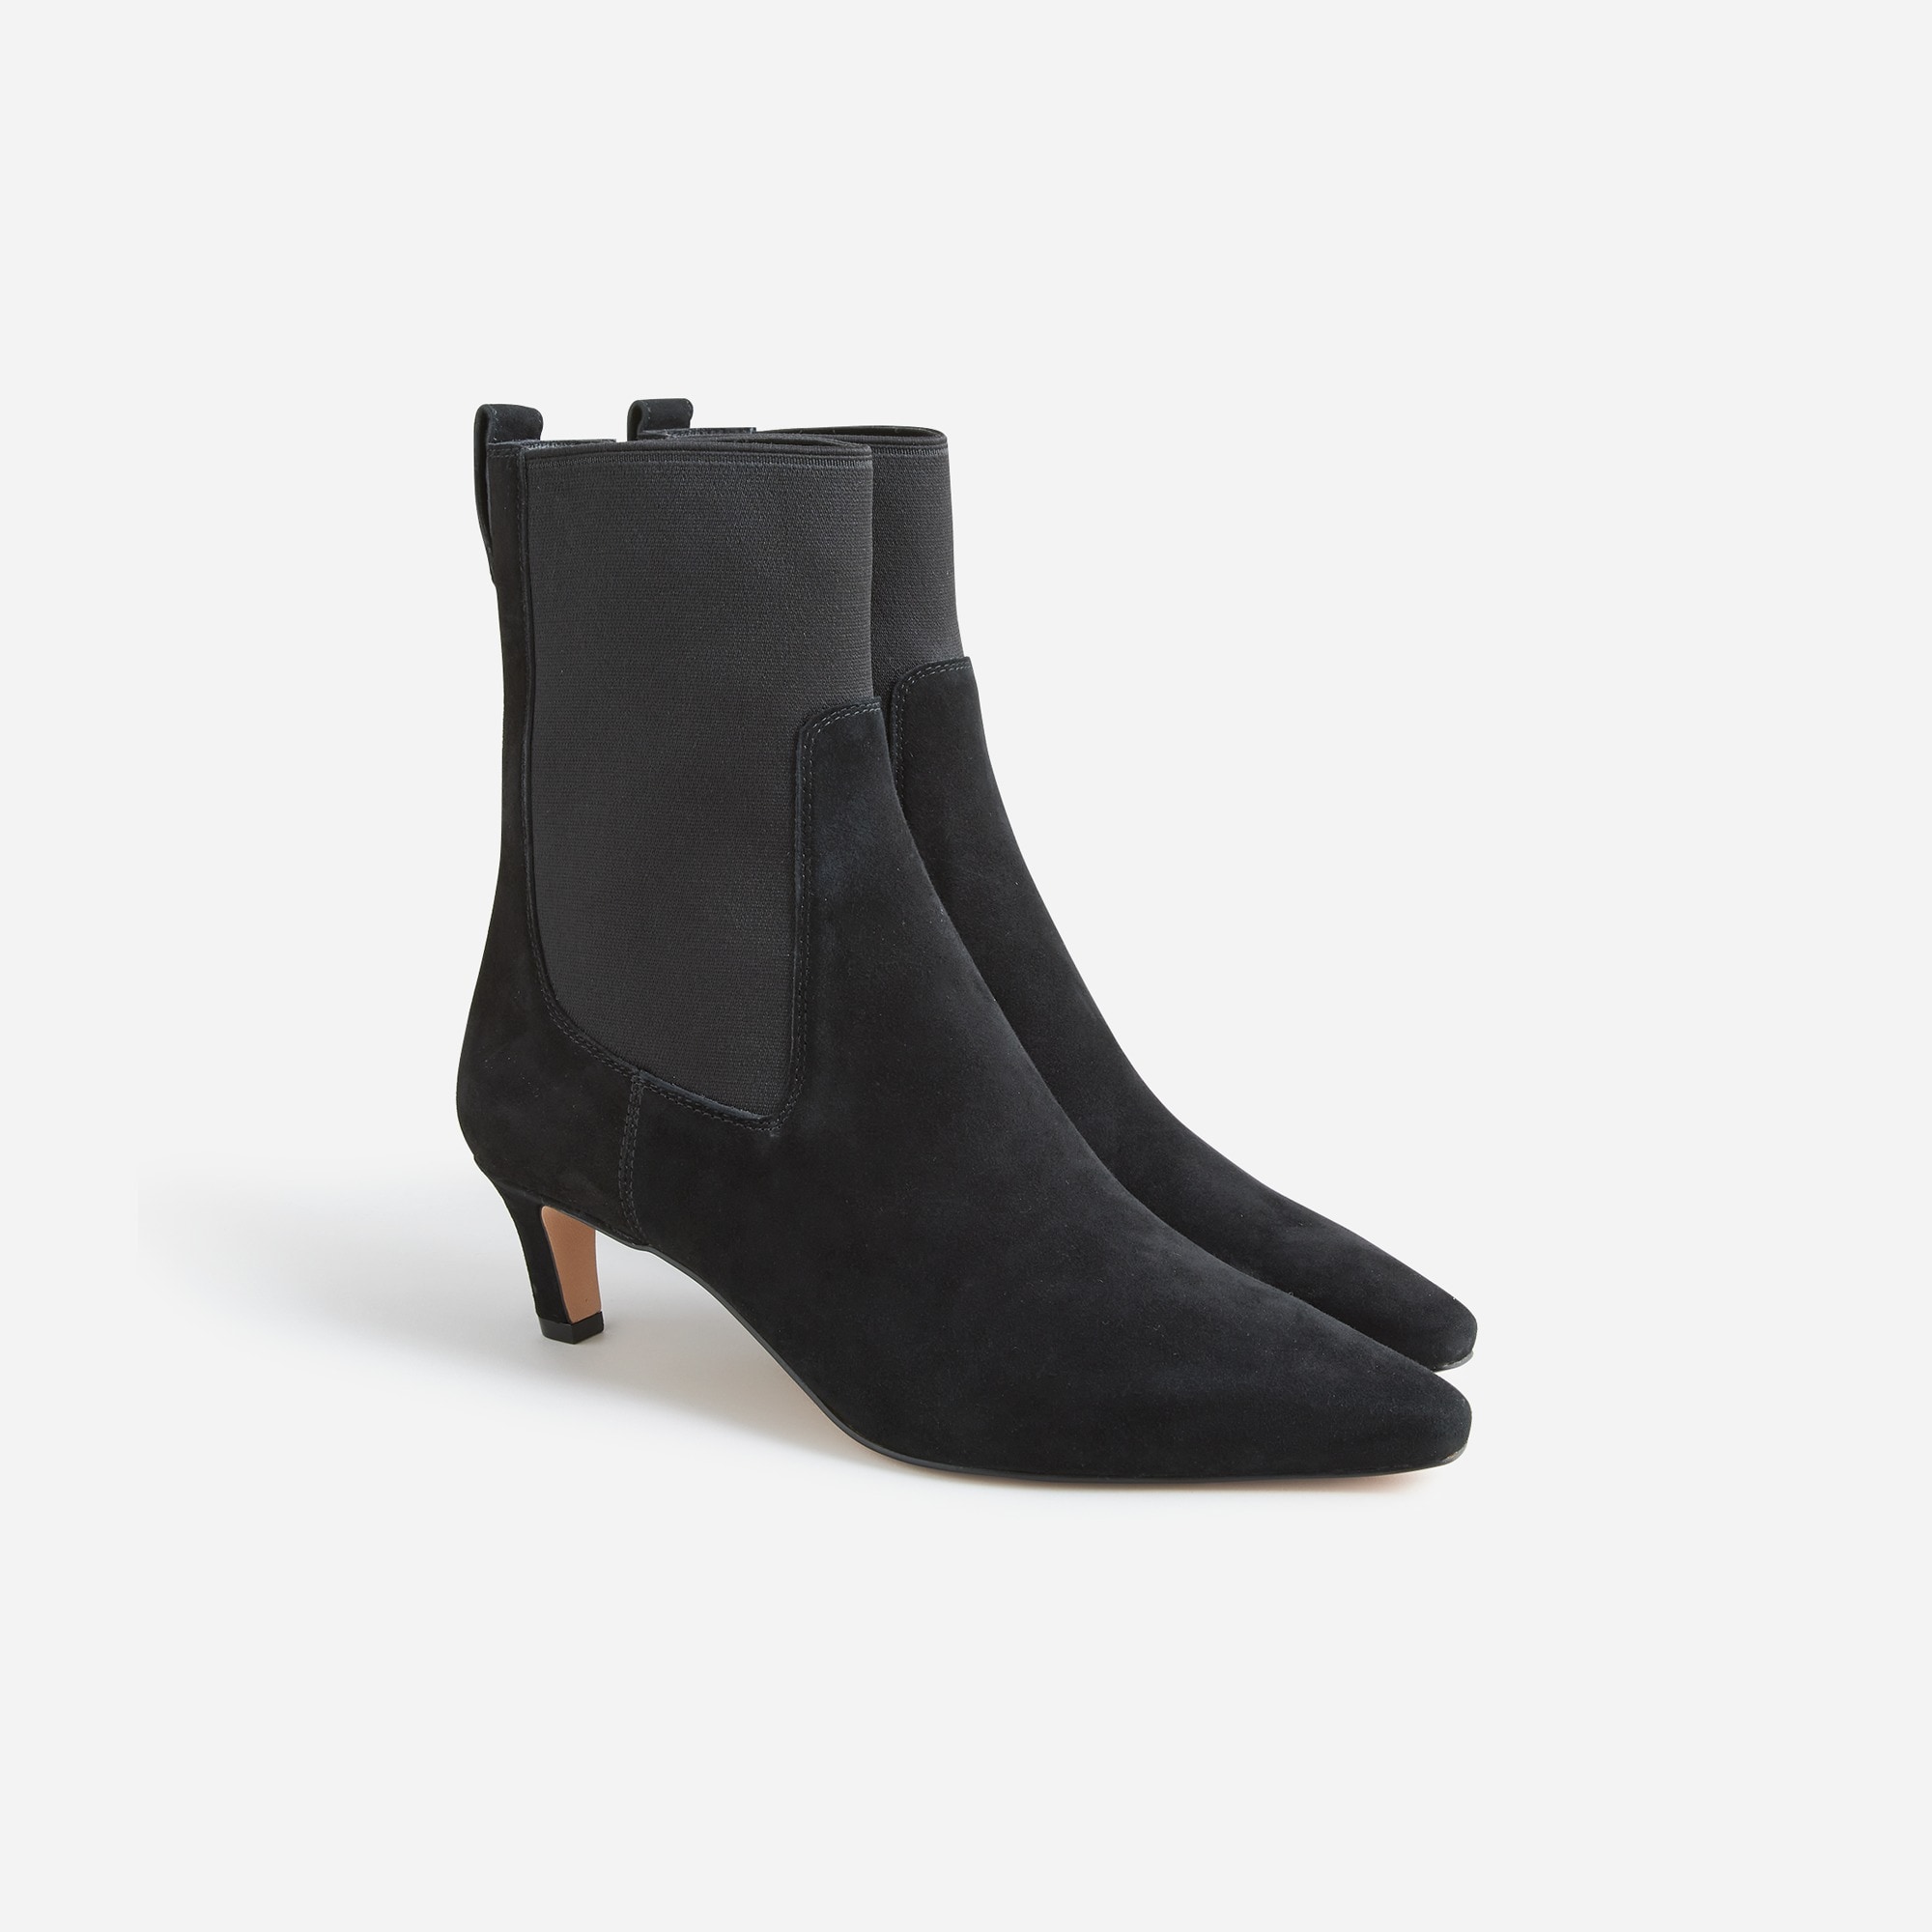  Stevie pull-on boots in suede